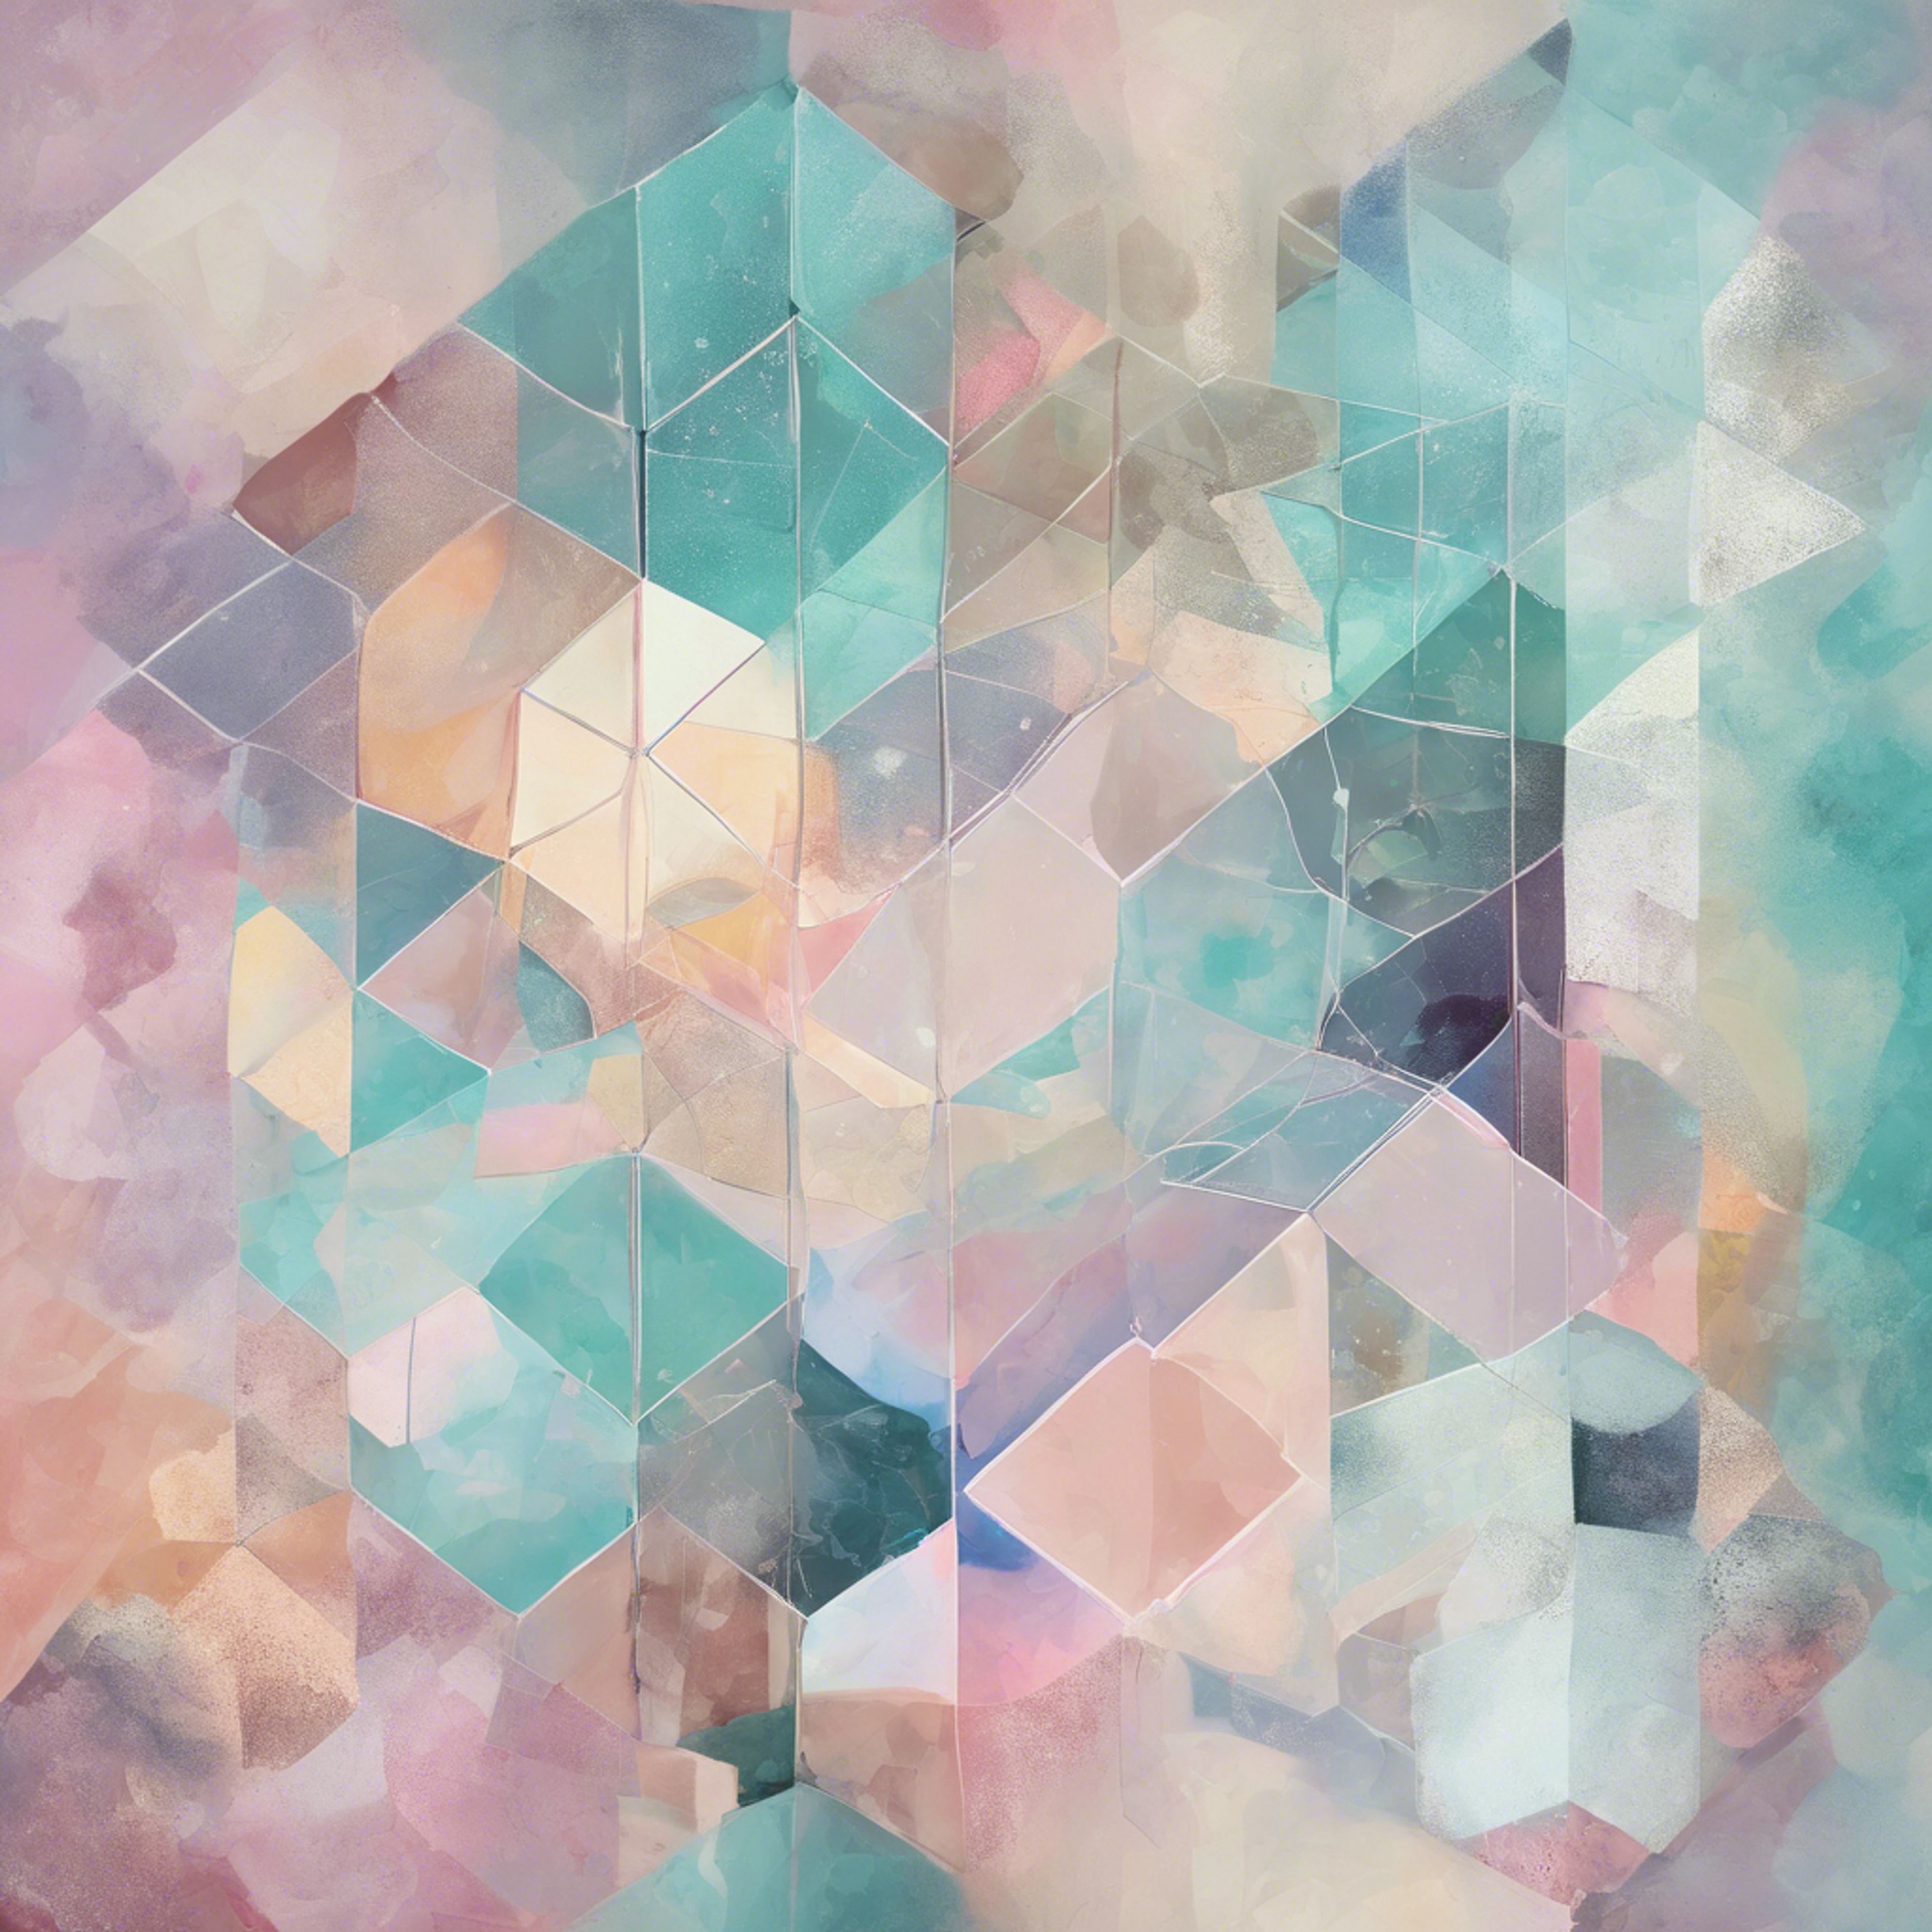 A cool pastel colored abstract painting emphasizing geometric patterns. Валлпапер[4610bdb5de564f779c91]